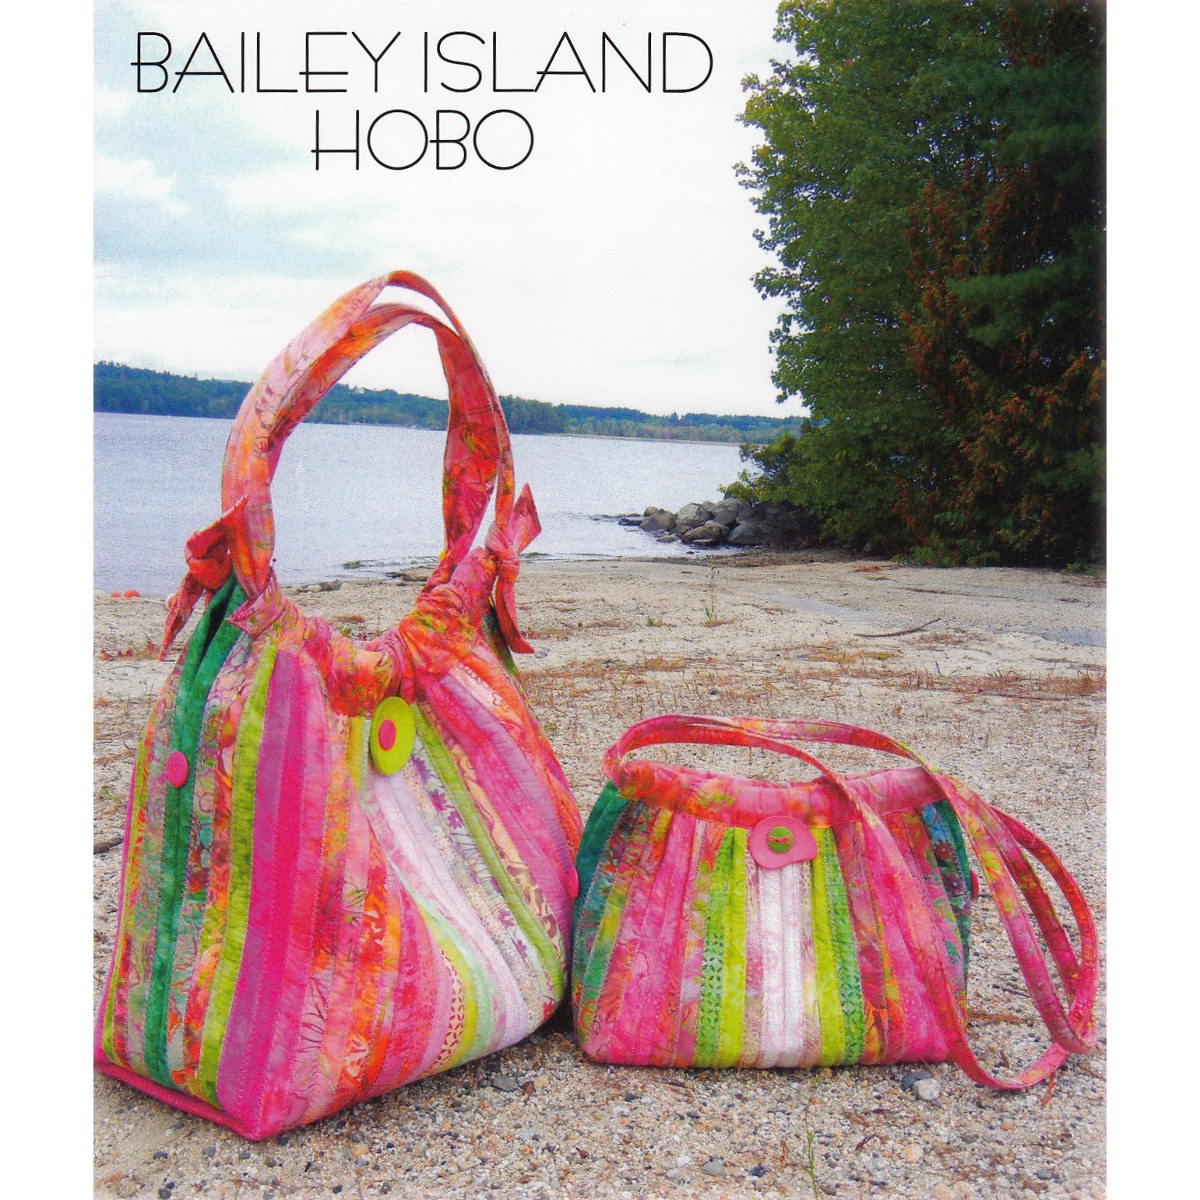 Bailey Island Hobo Bag Pattern, Aunties Two Patterns image # 41866